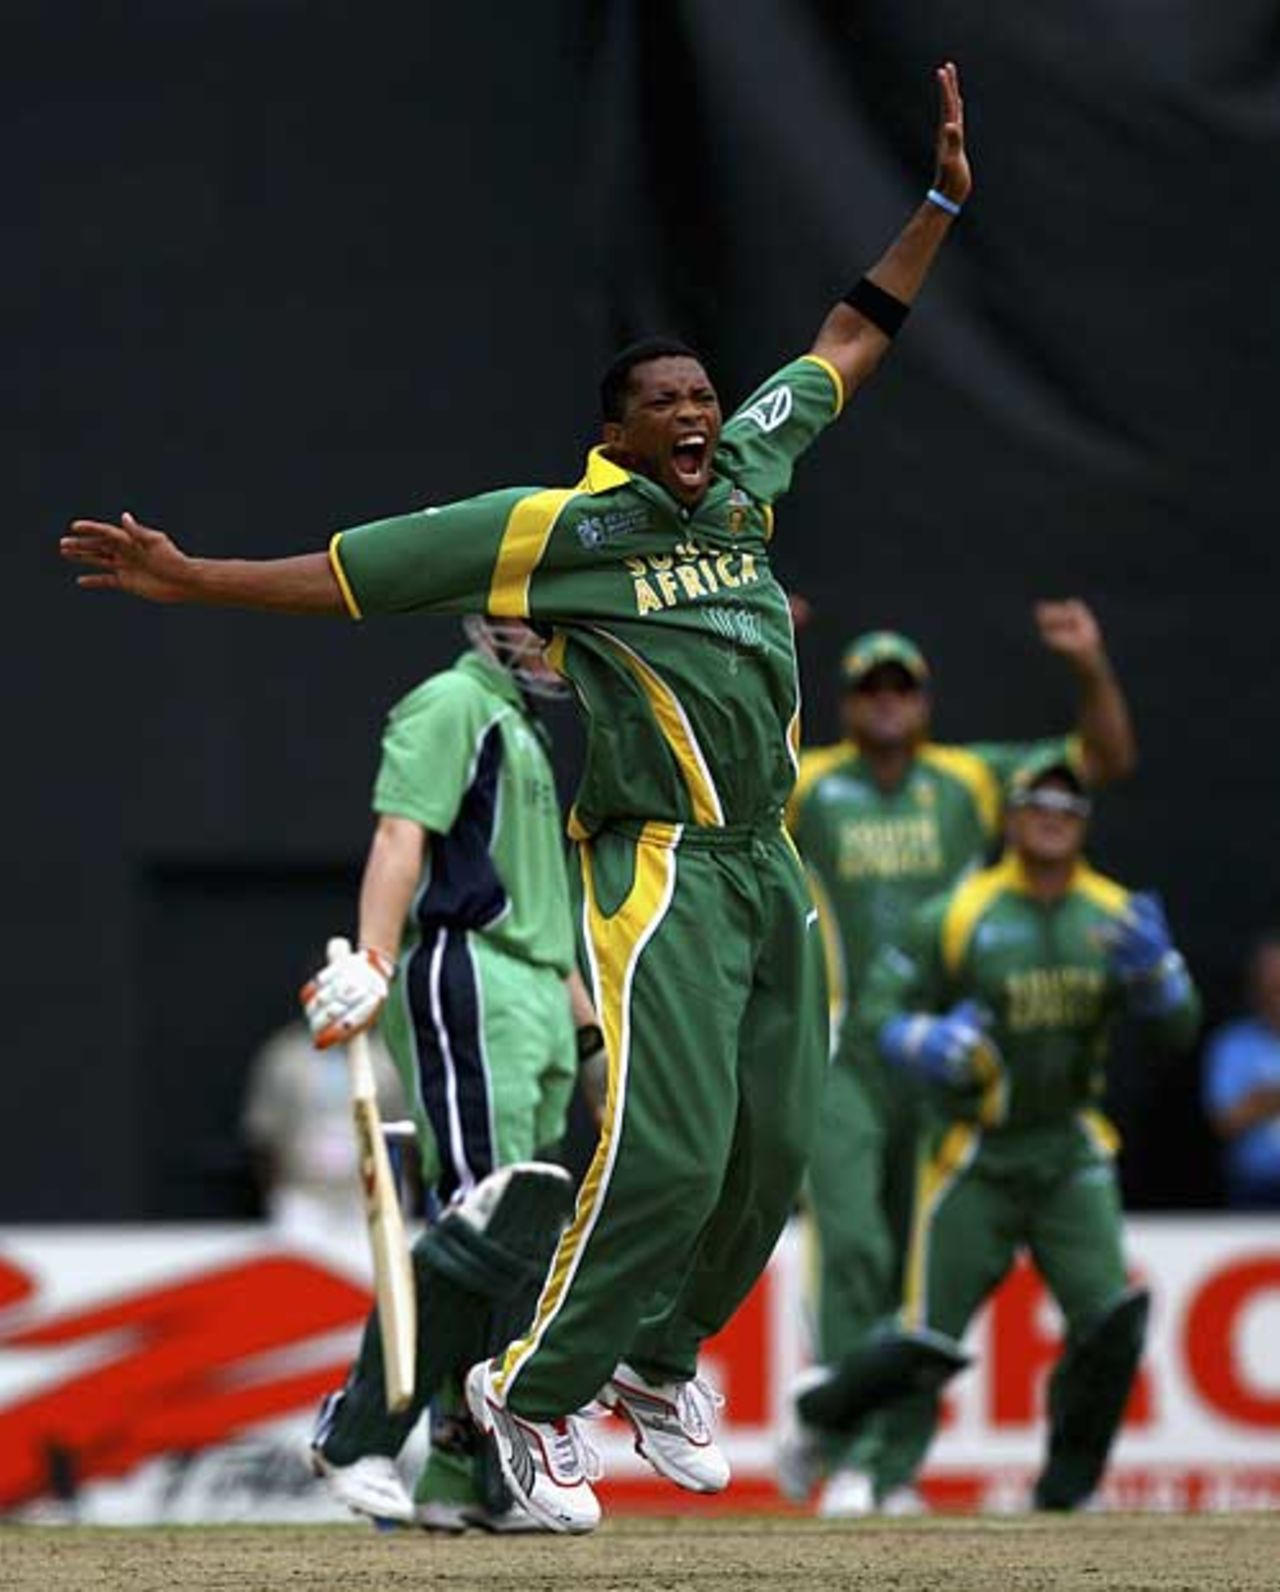 Makhaya Ntini roars an appeal as South Africa make life tough early on, Ireland v South Africa, Guyana, April 3, 2007